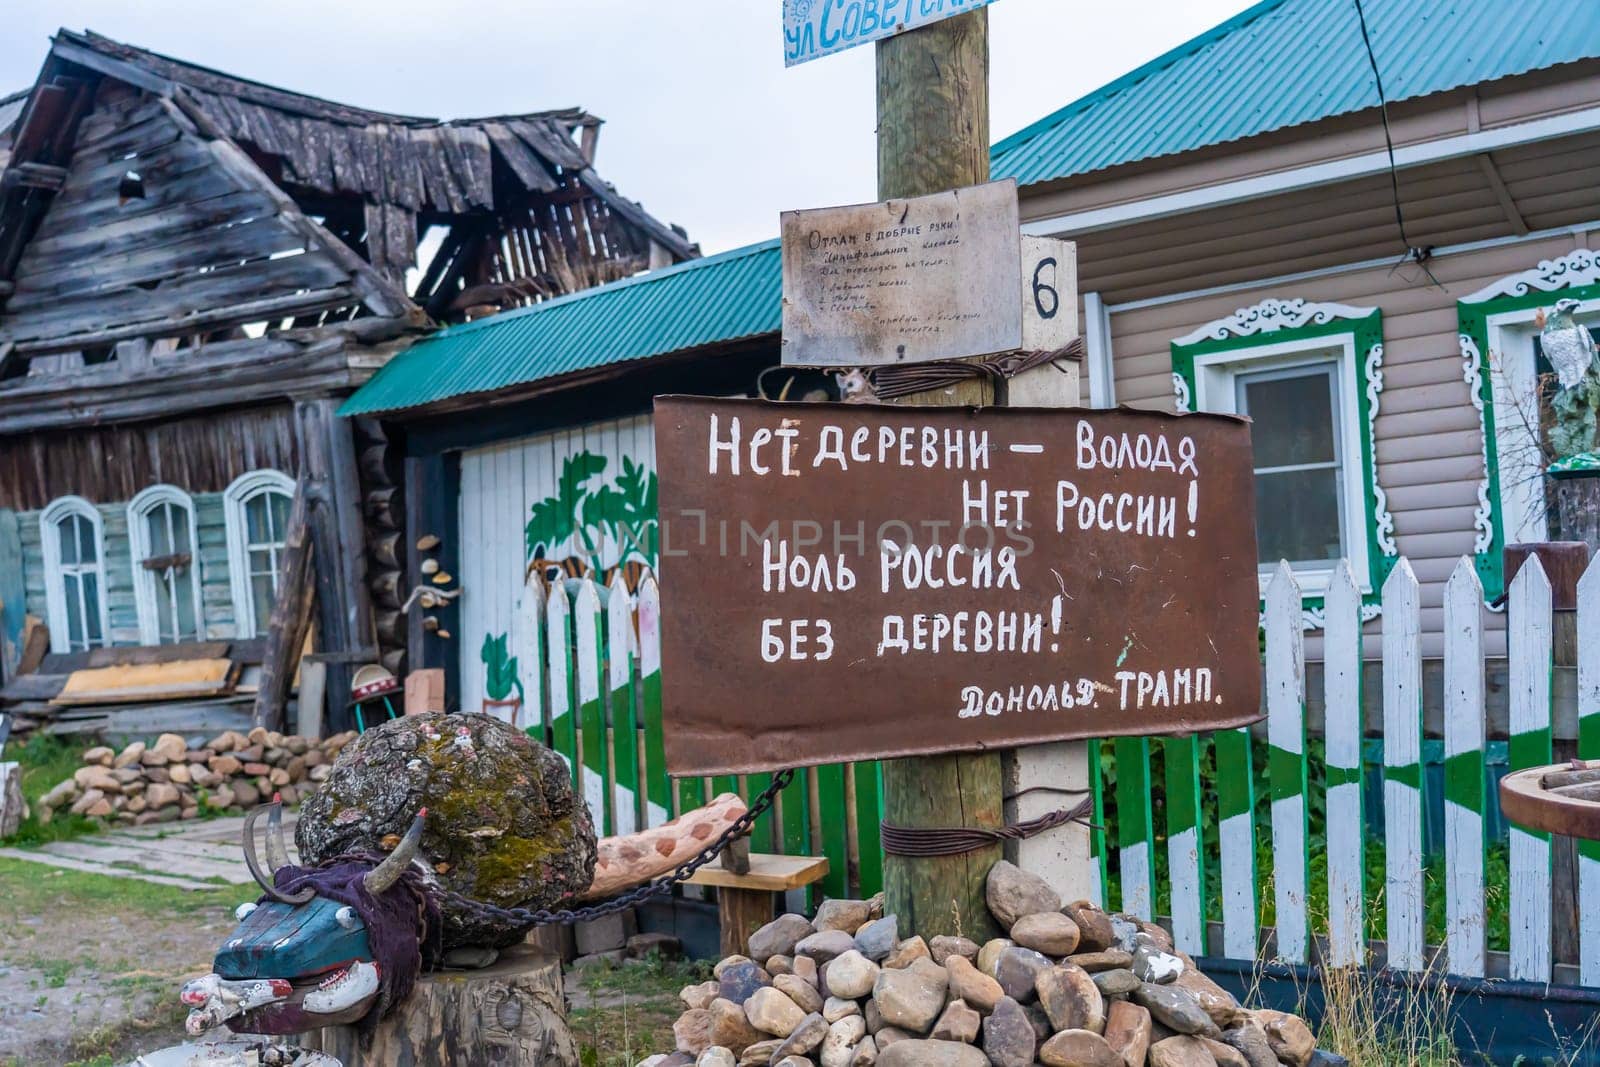 Russian funny and humorous inscriptions in the village of Tyulyuk in the South Urals